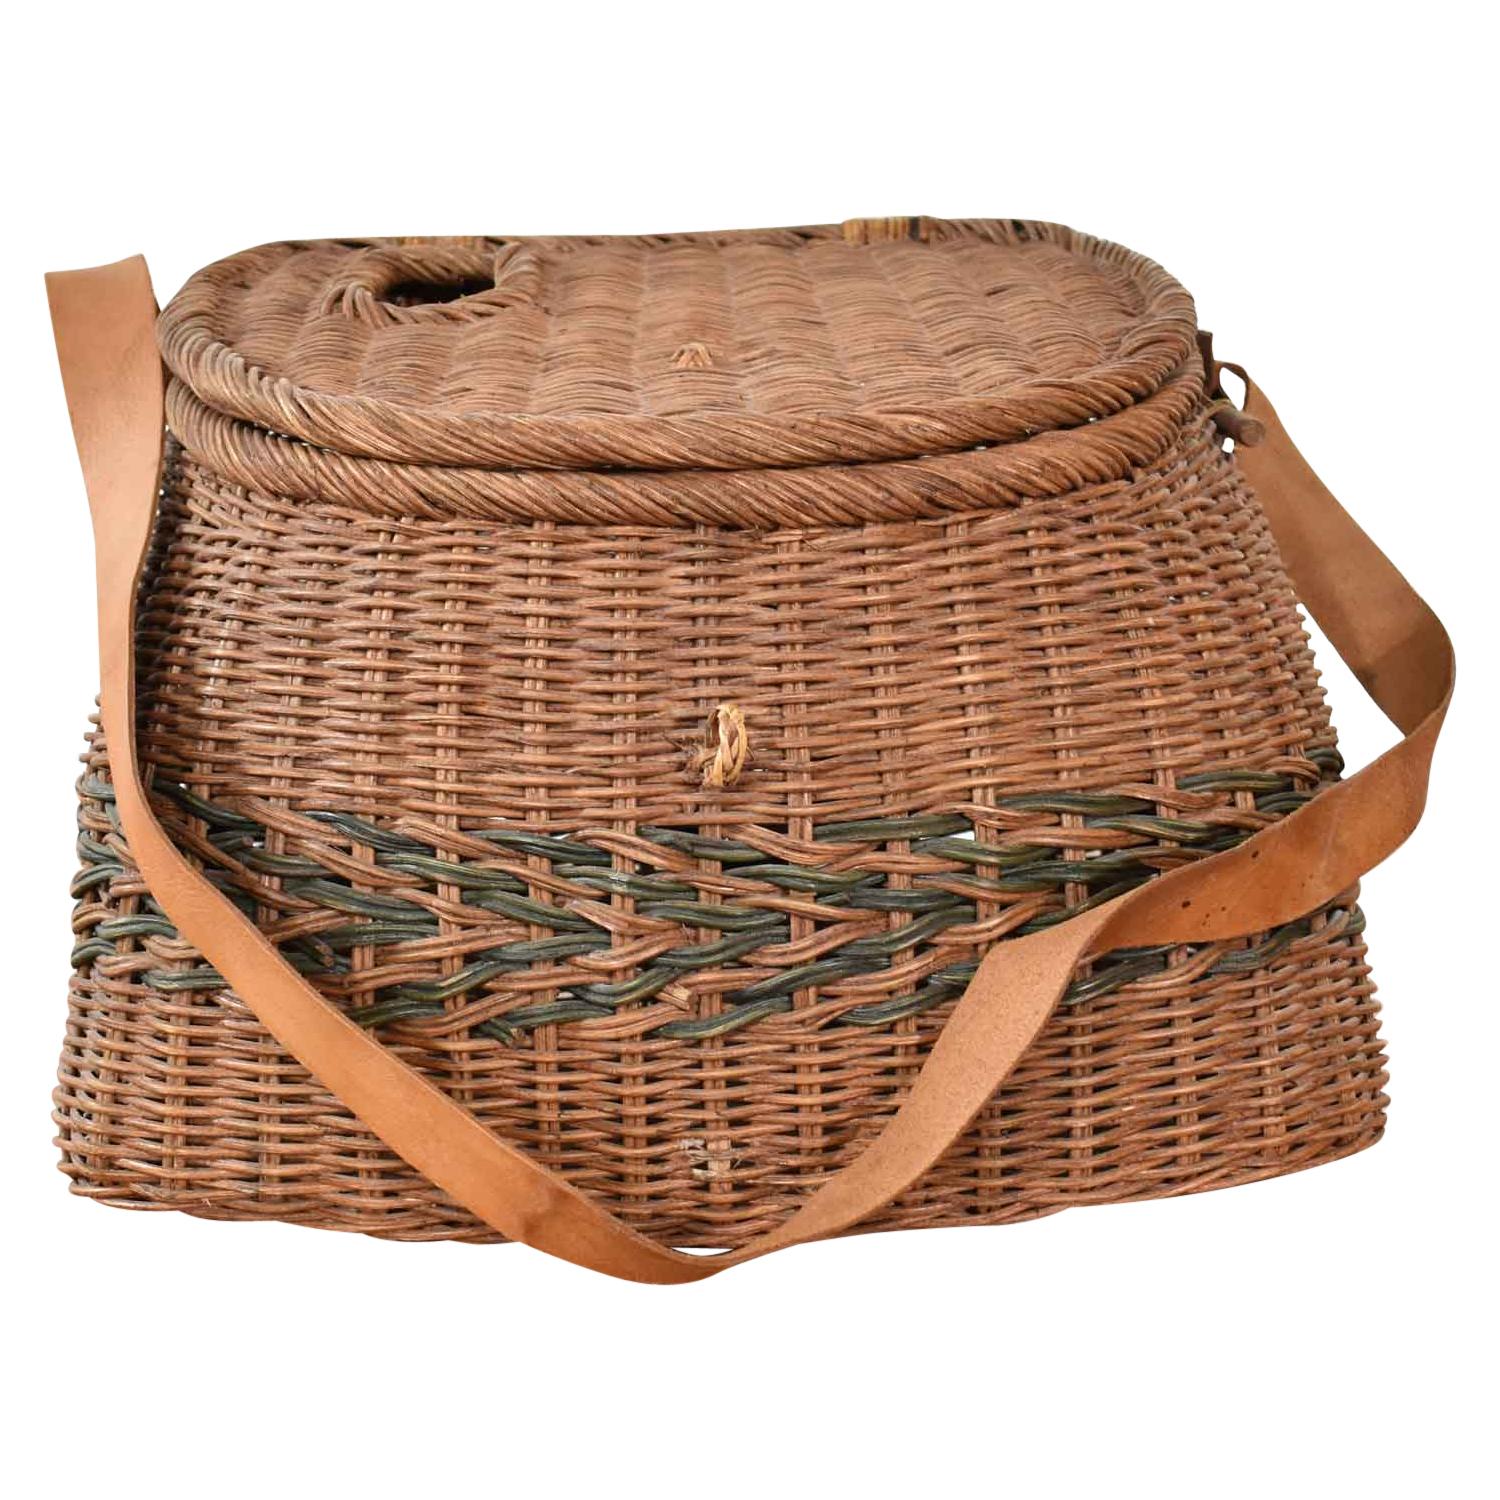 https://a.1stdibscdn.com/antique-wicker-basket-fishing-creel-with-leather-strap-handle-for-sale/1121189/f_190620521590768992195/19062052_master.jpg